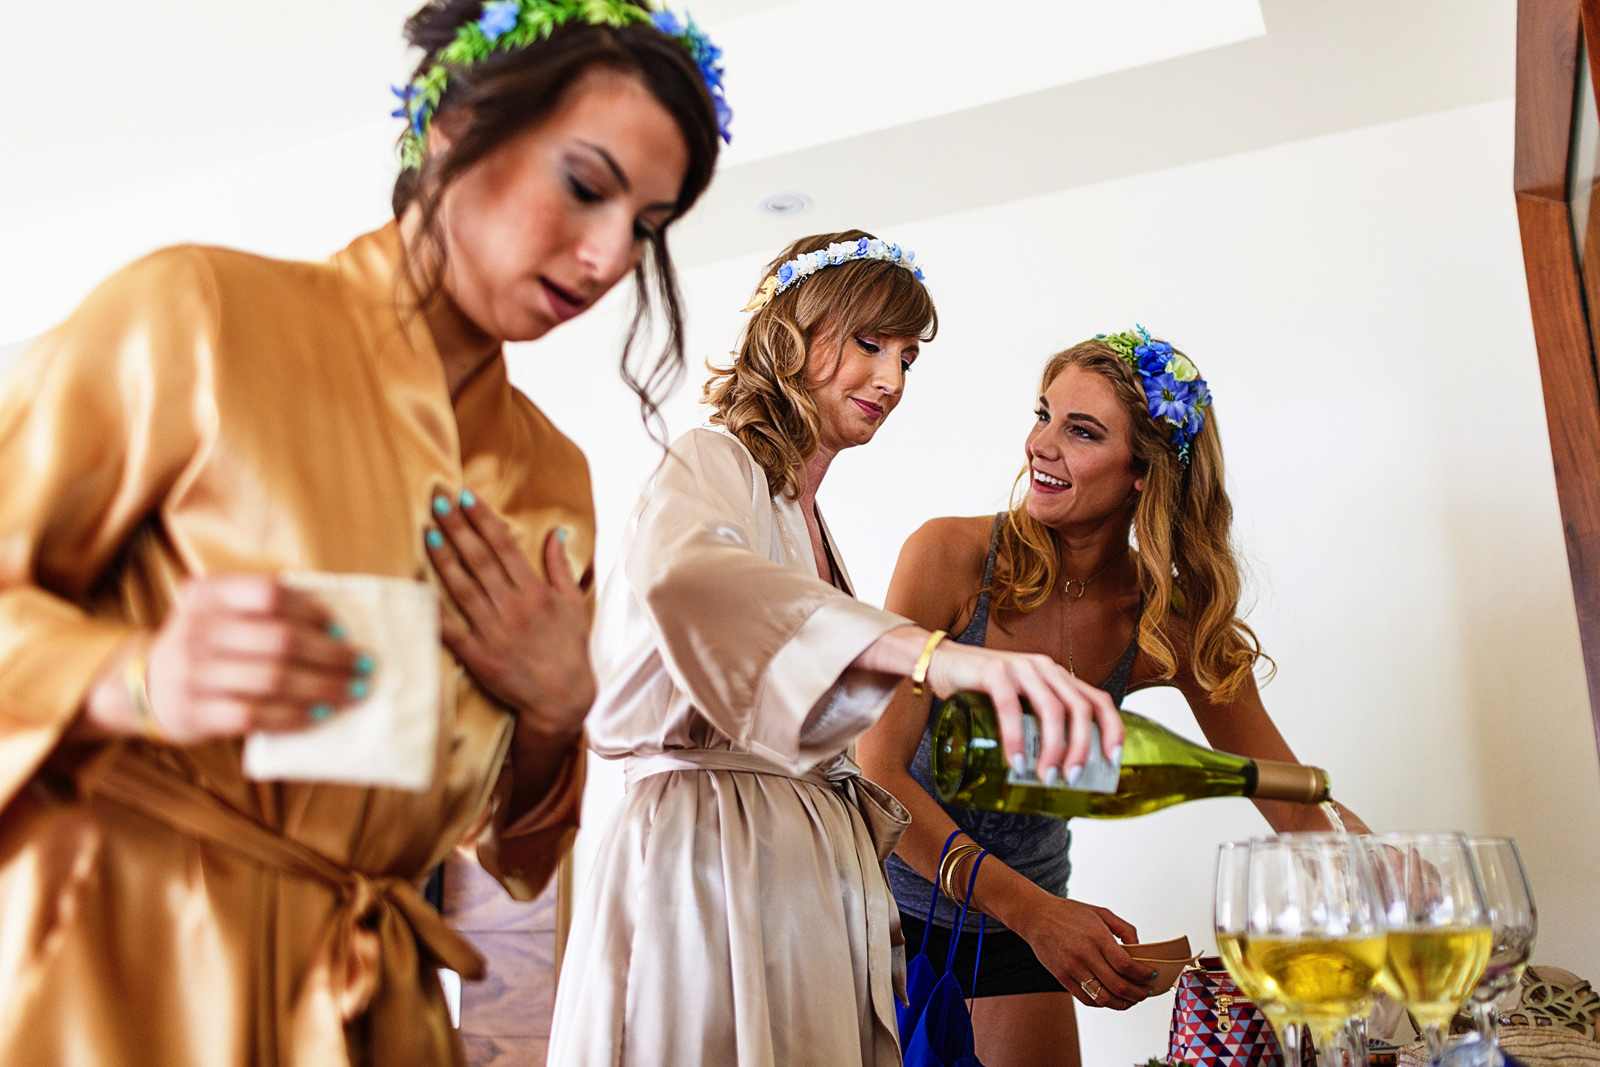 Bride serving champagne into a glass during the make-up and hair preparations in the bridal suite before the destination wedding ceremony